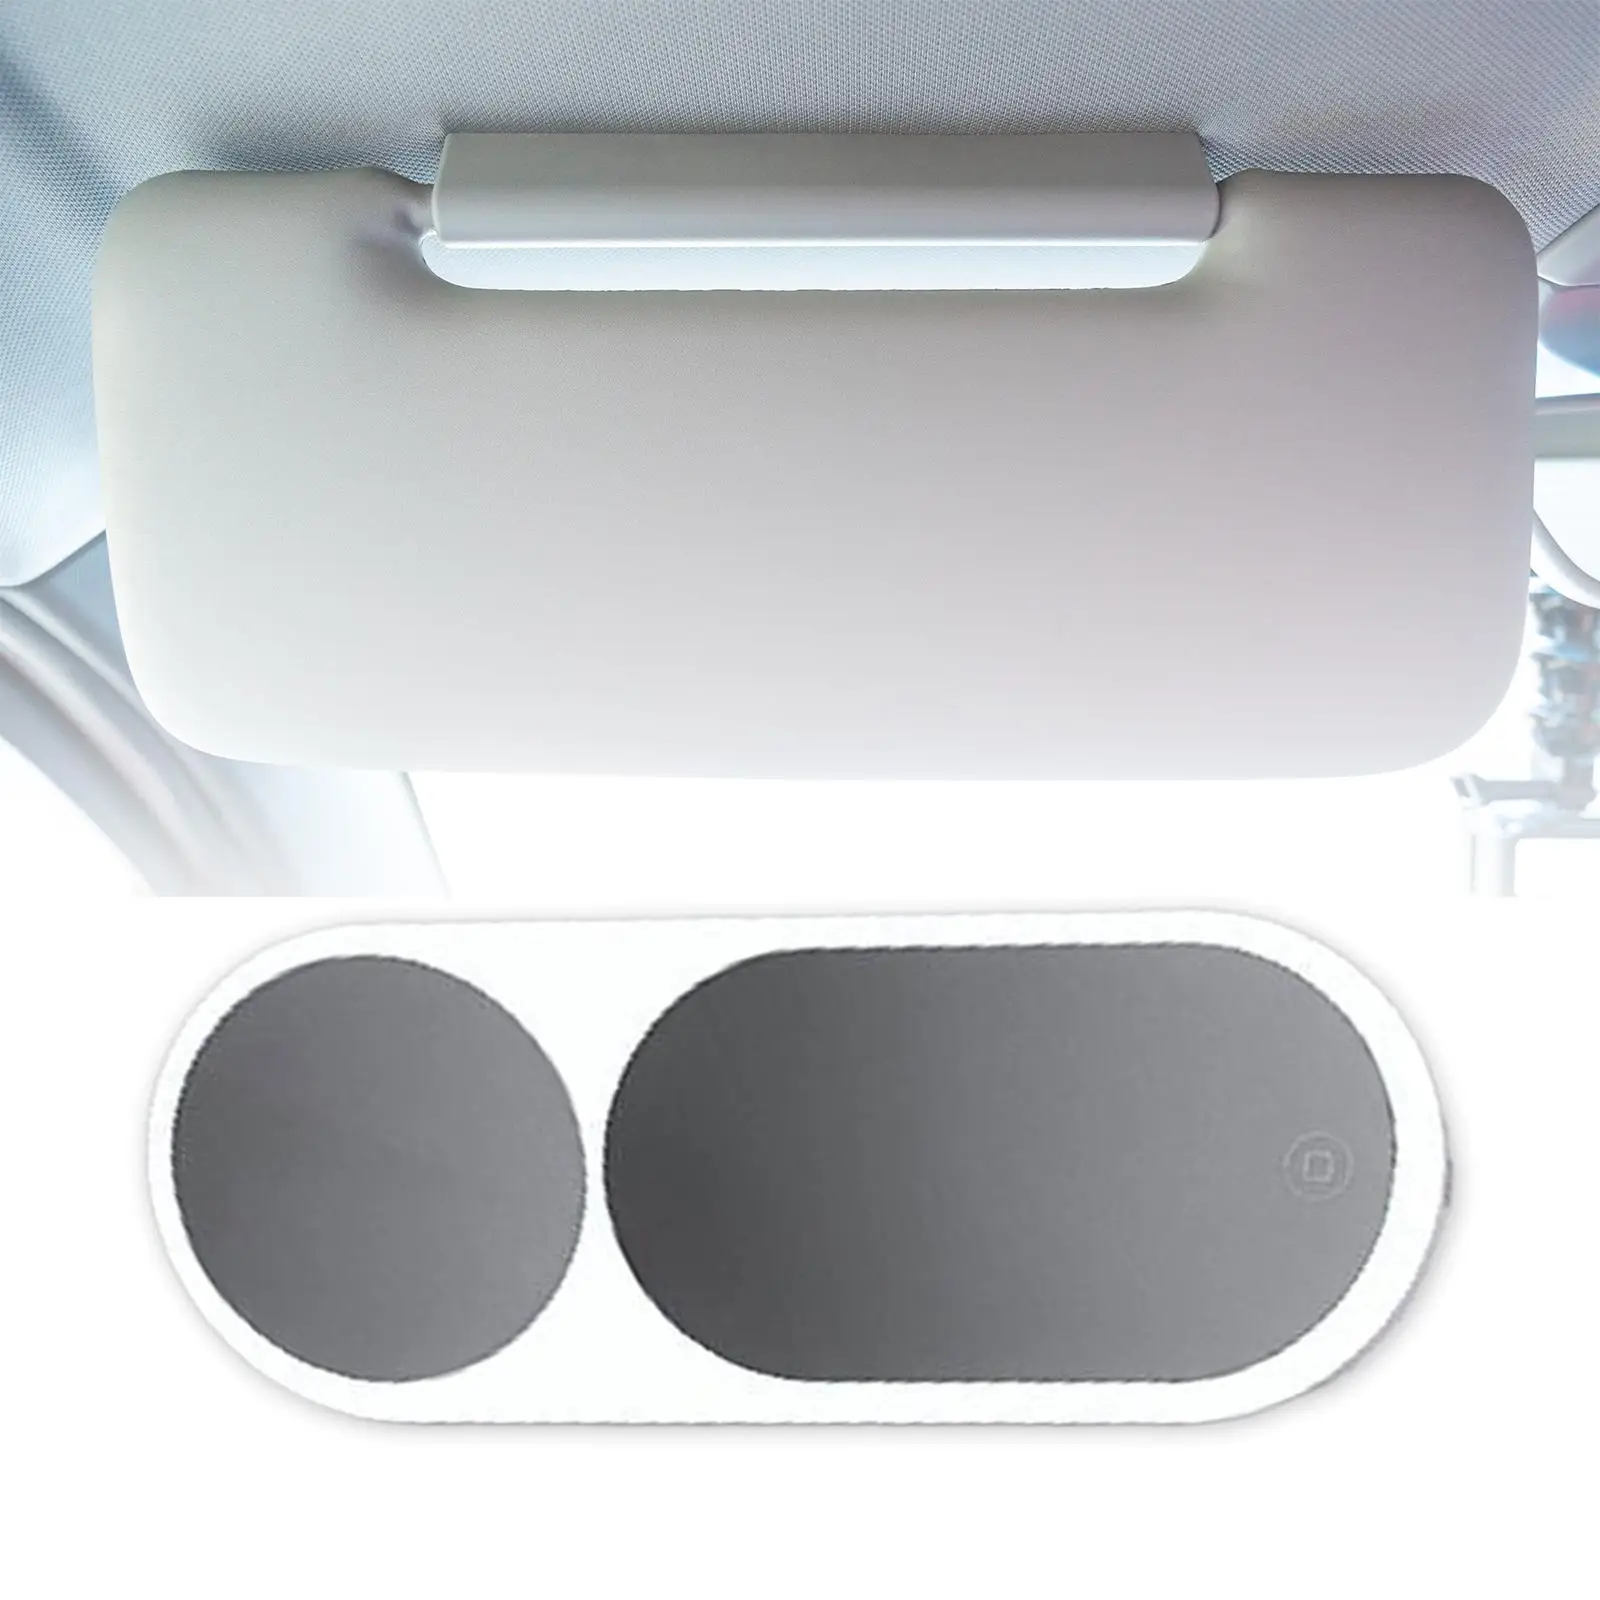 Car Sun Visor Makeup Mirror Women Cosmetic Mirror High Quality Auto Vanity Mirror High Stretch Fixing Straps for Automobile